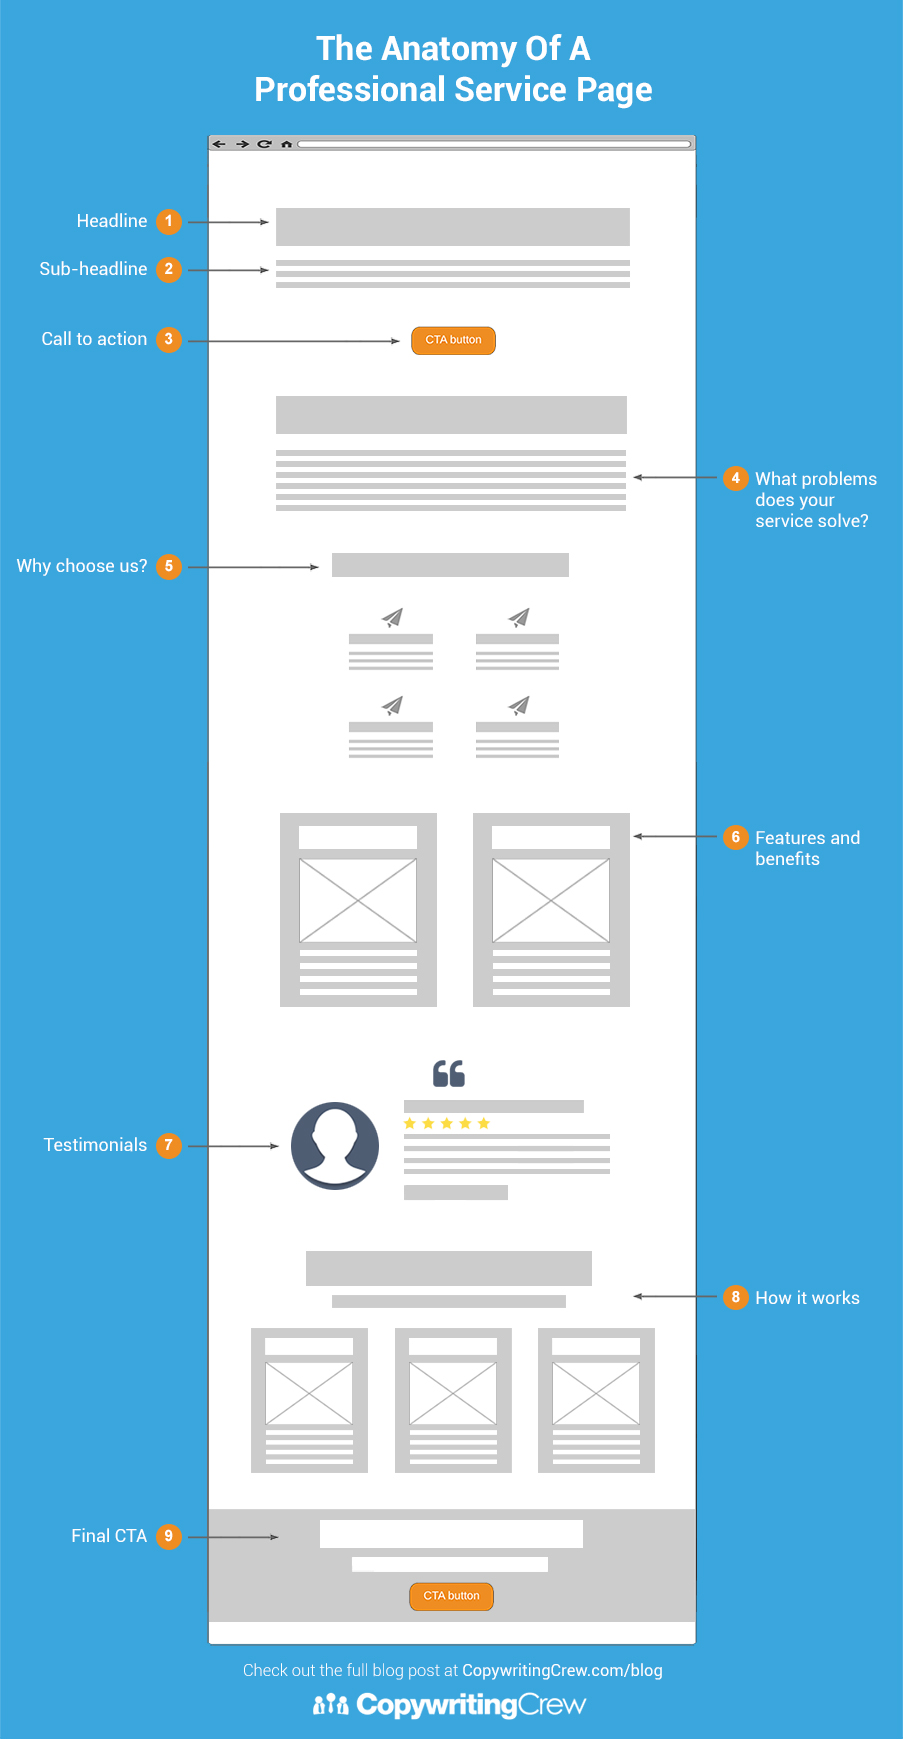 The Anatomy Of A Professional Service Page